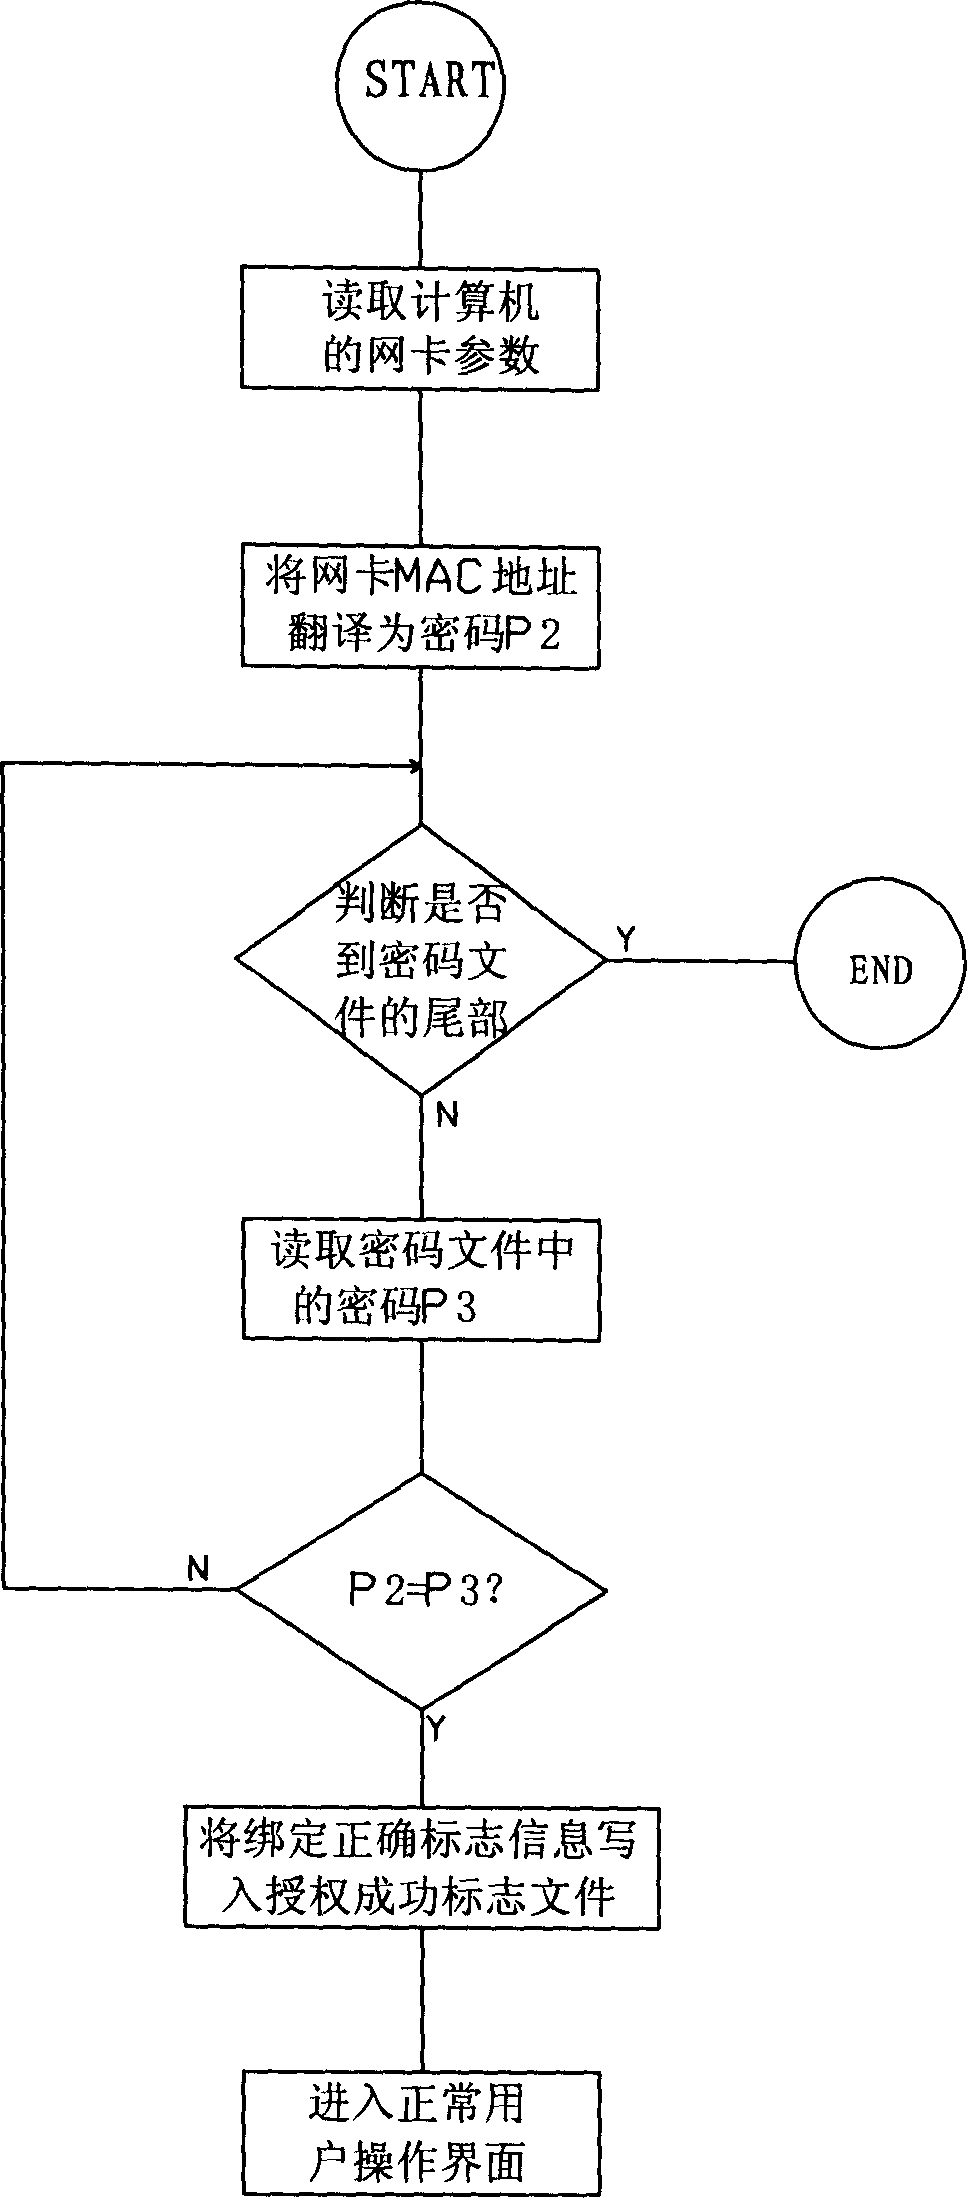 Method of preoenting software non-authorized use by using network card physical address